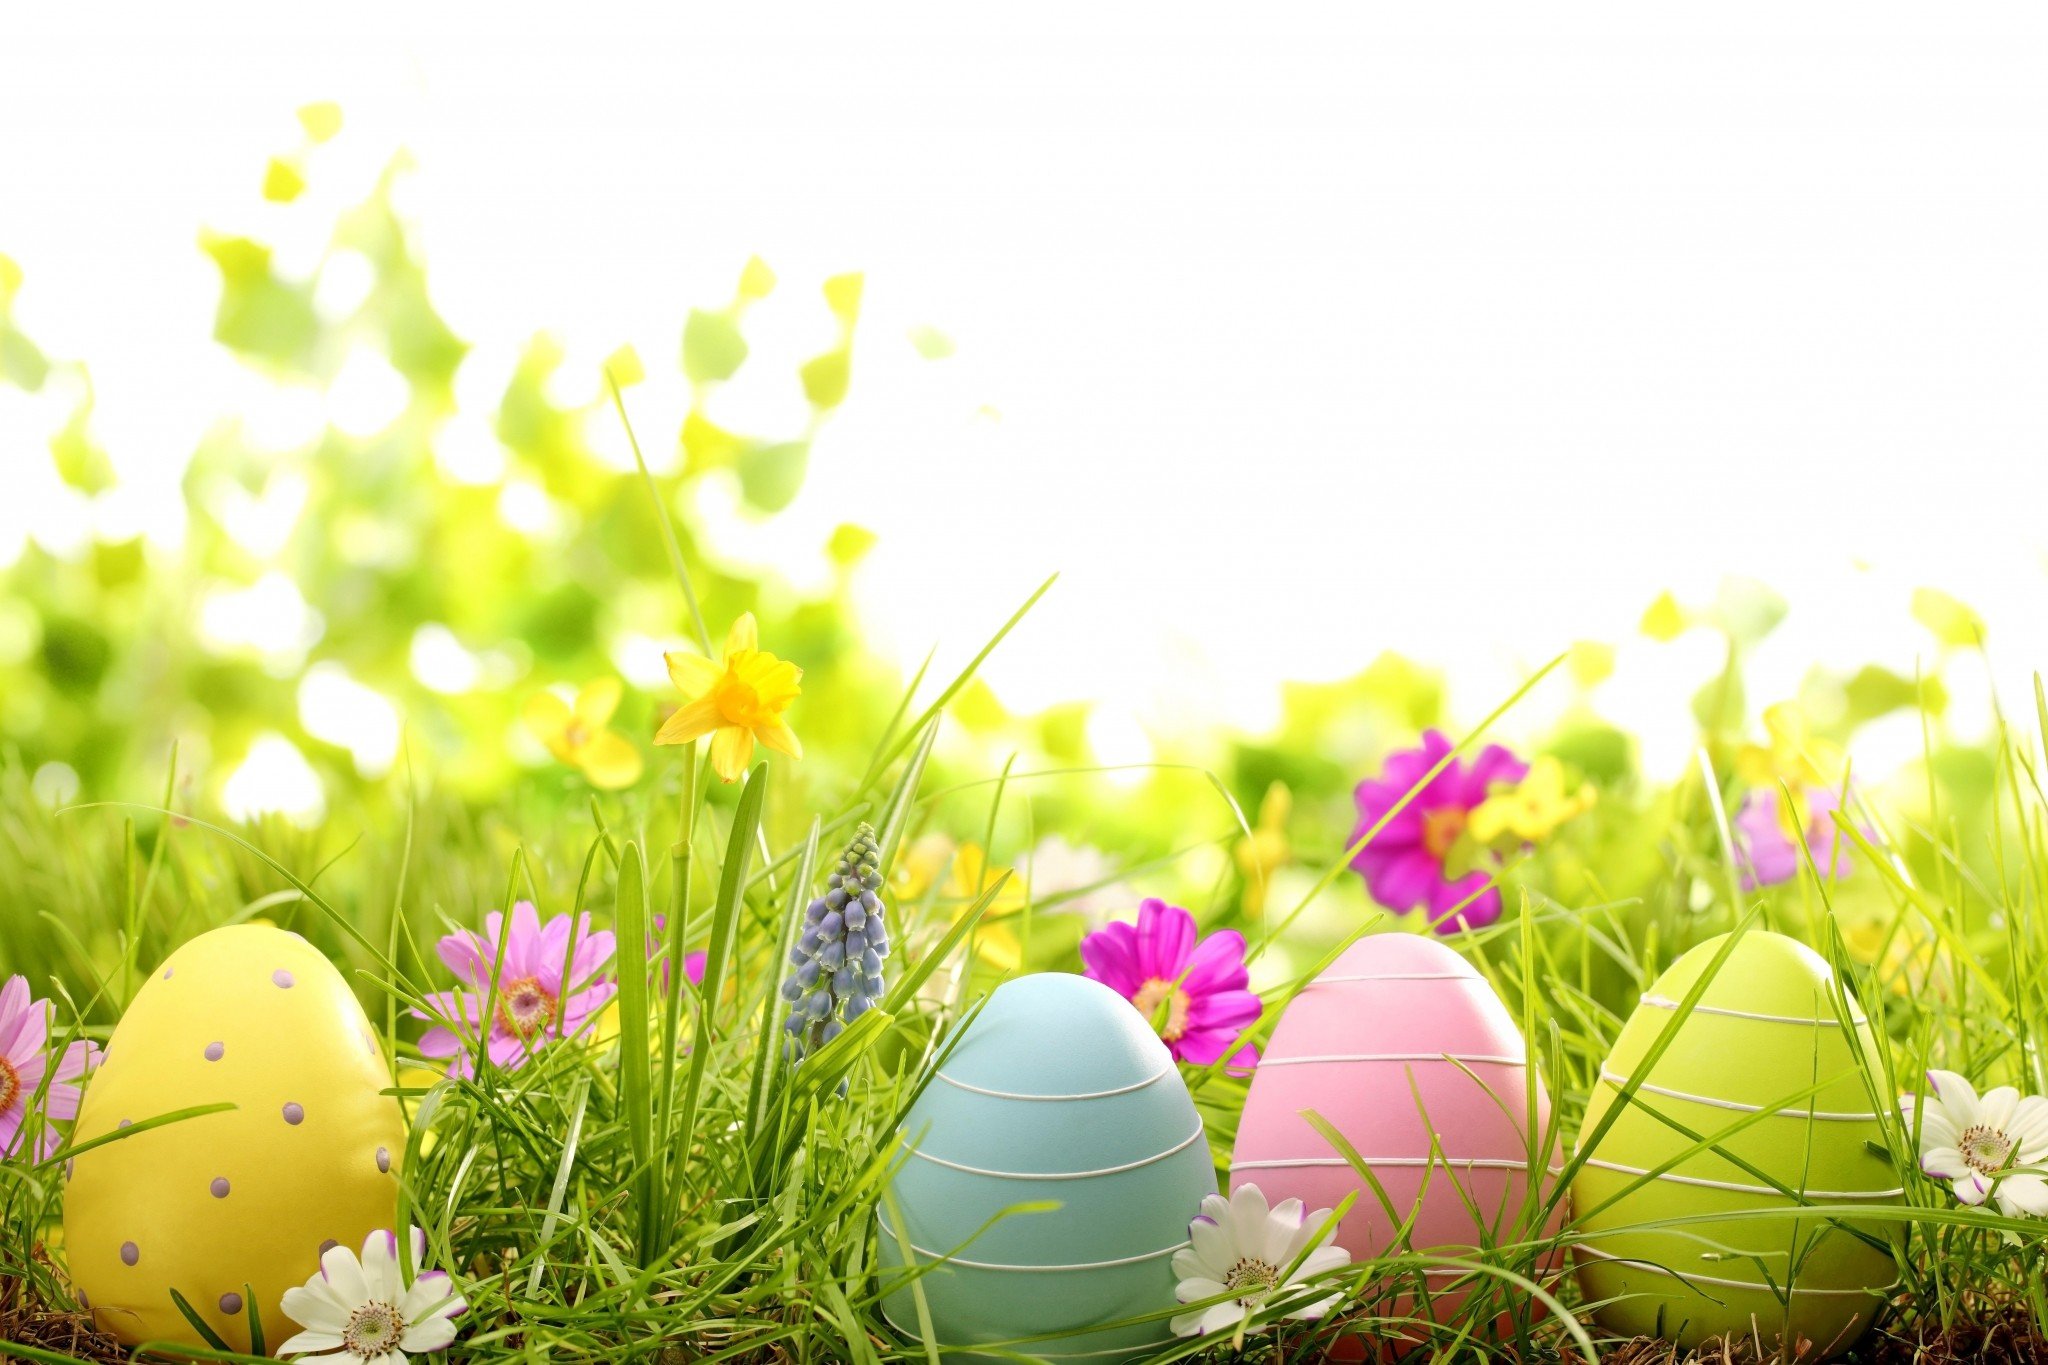 Happy Easter Wallpapers Hd   Easter Opening Hours 2019 930746 2048x1365